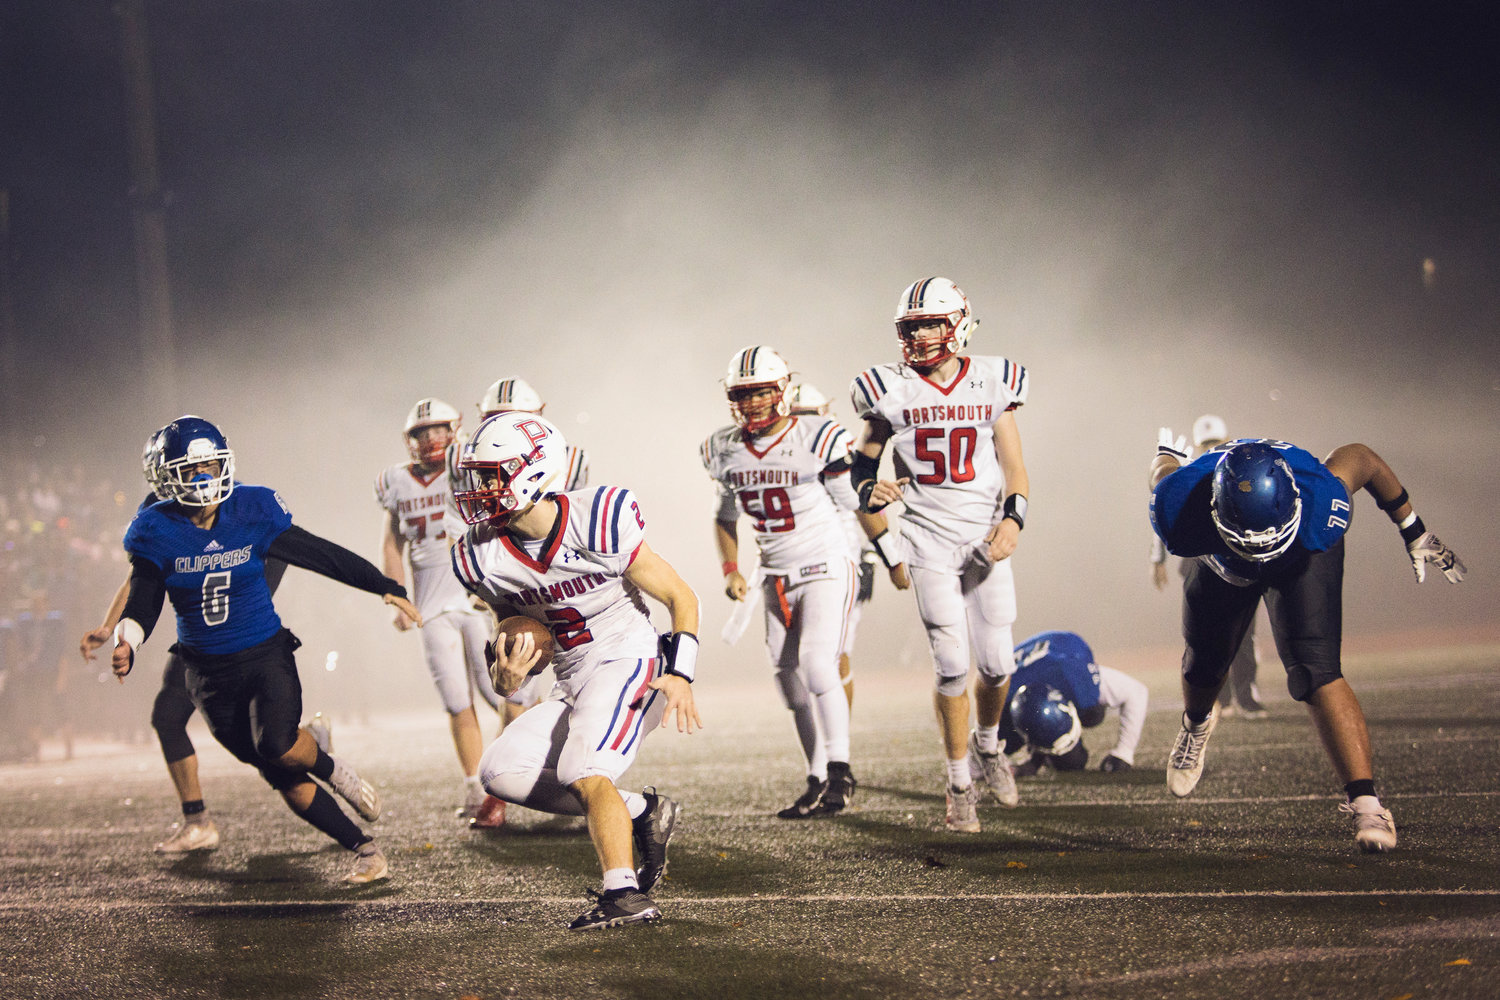 Patriots quarterback Benny Hurd carries the ball as the fog envelopes Portsmouth and Cumberland players during the second round of the Division I playoffs on Friday. Portsmouth prevailed, 24-7, and will face North Kingstown in the semifinals at 3:30 p.m. Saturday, Nov. 20, at Cranston Stadium.